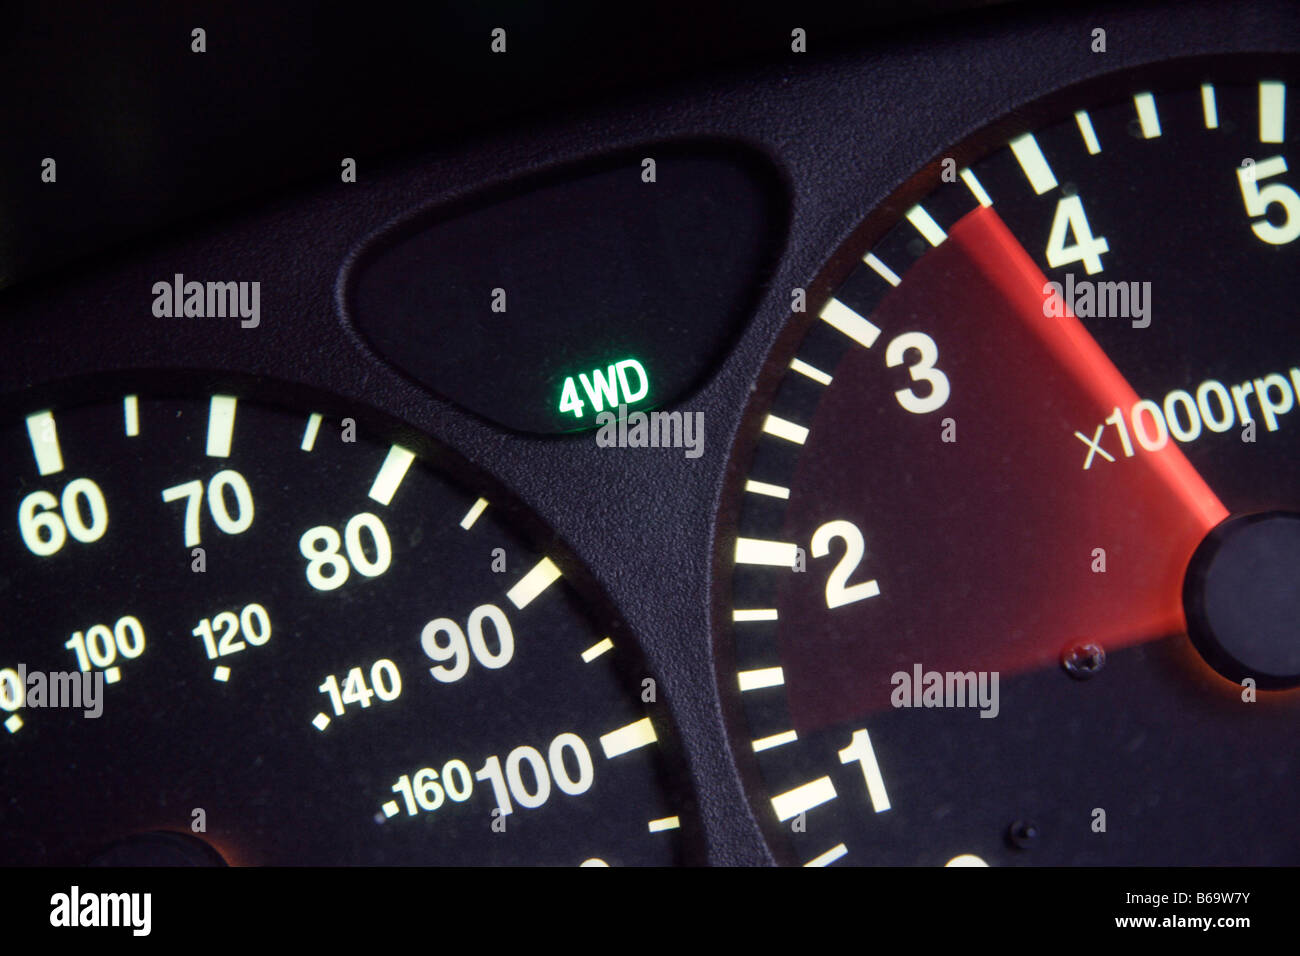 Rev, Counter, Dashboard, 4WD, Four, Wheel, Drive, Revs, Per, Minute, Car,  Driving, Vehicle, Van, SUV, Rover, Range, Speed, Speed Stock Photo - Alamy